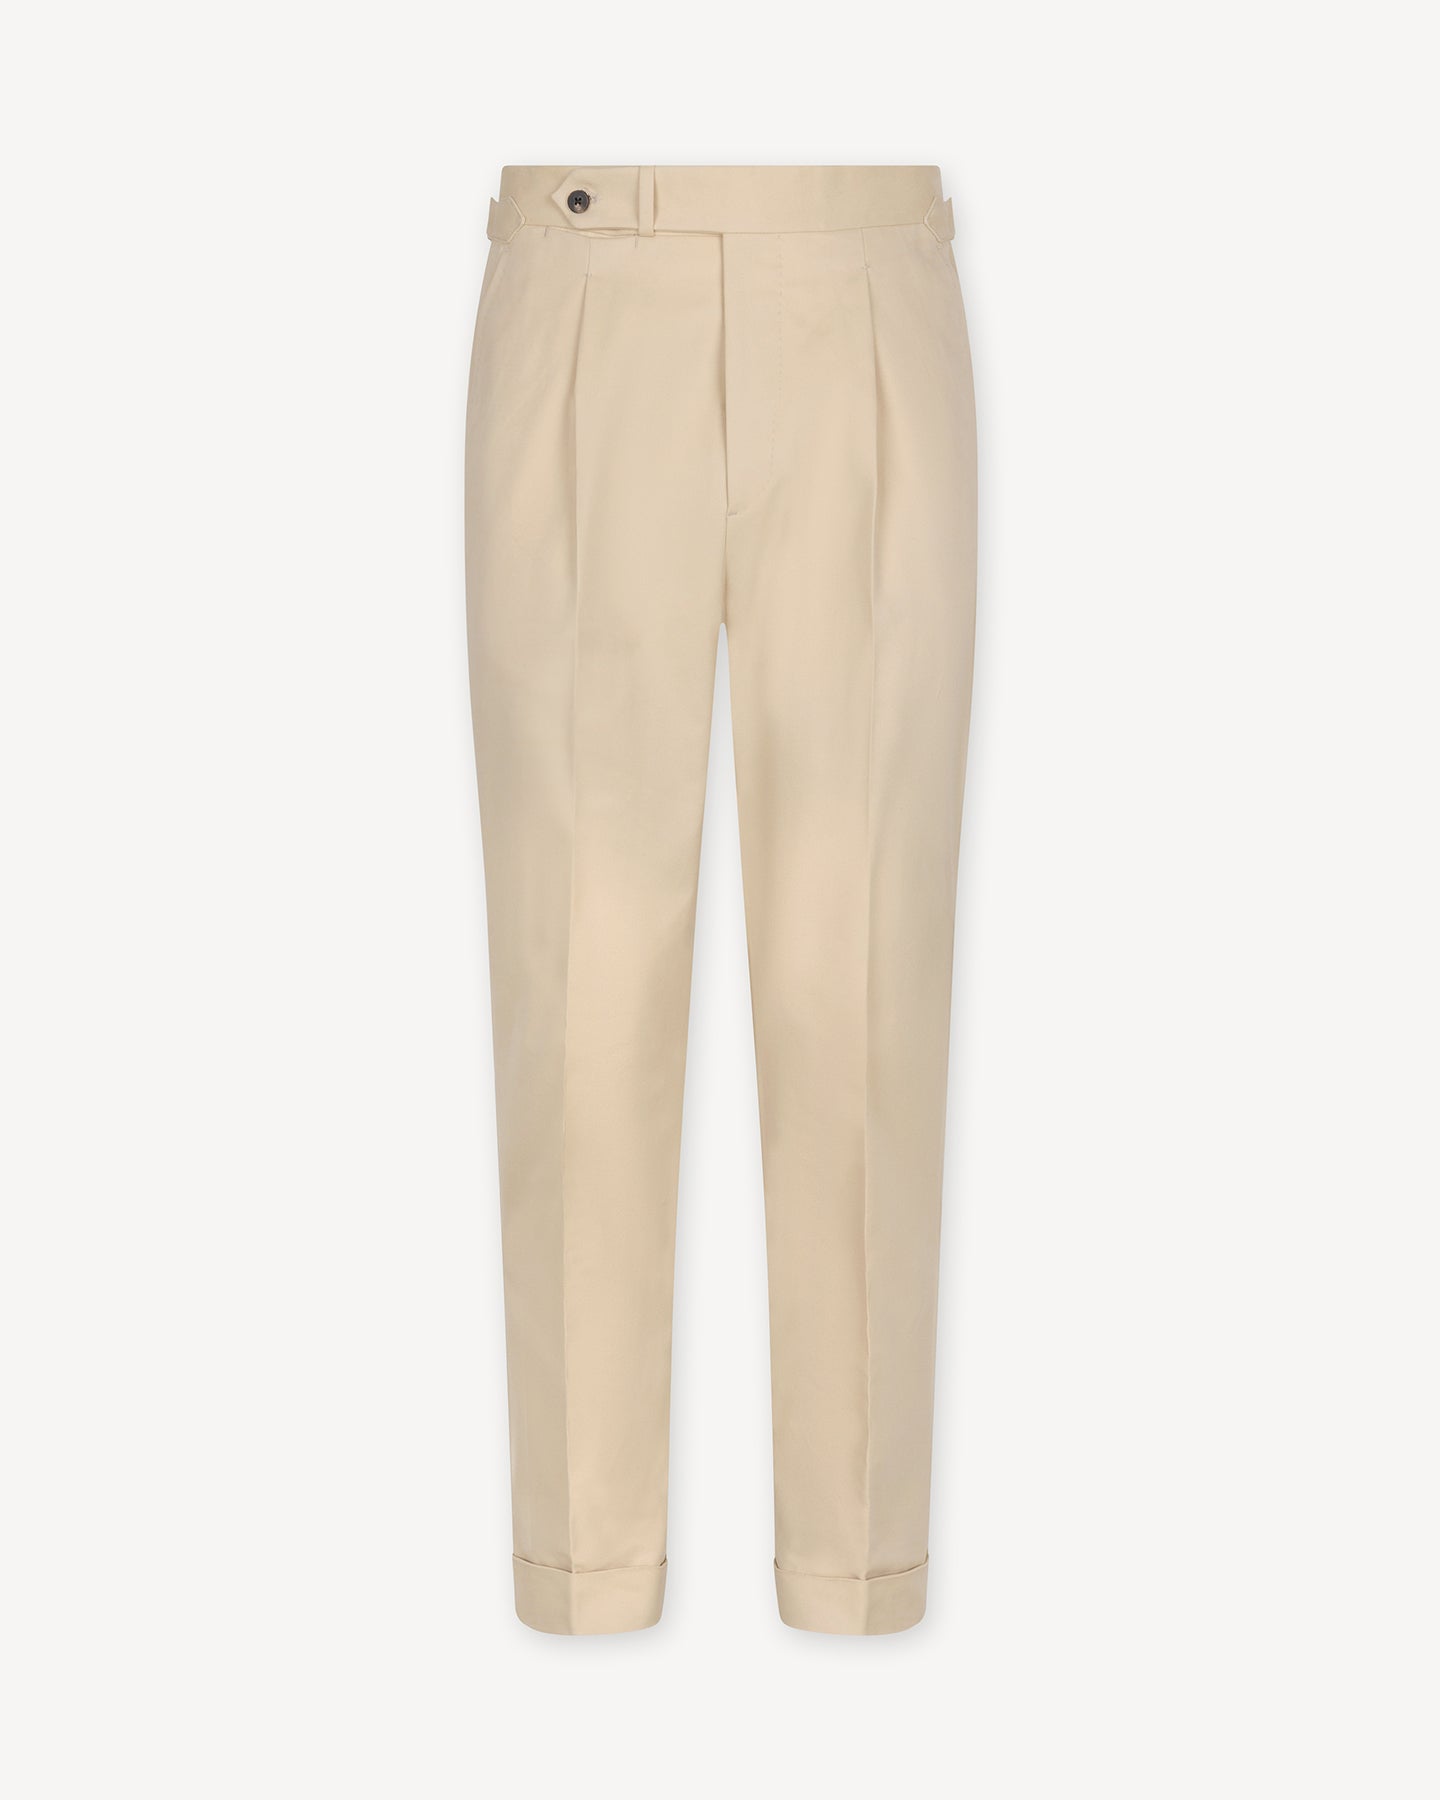 Cream cotton trousers with single pleats and side adjusters